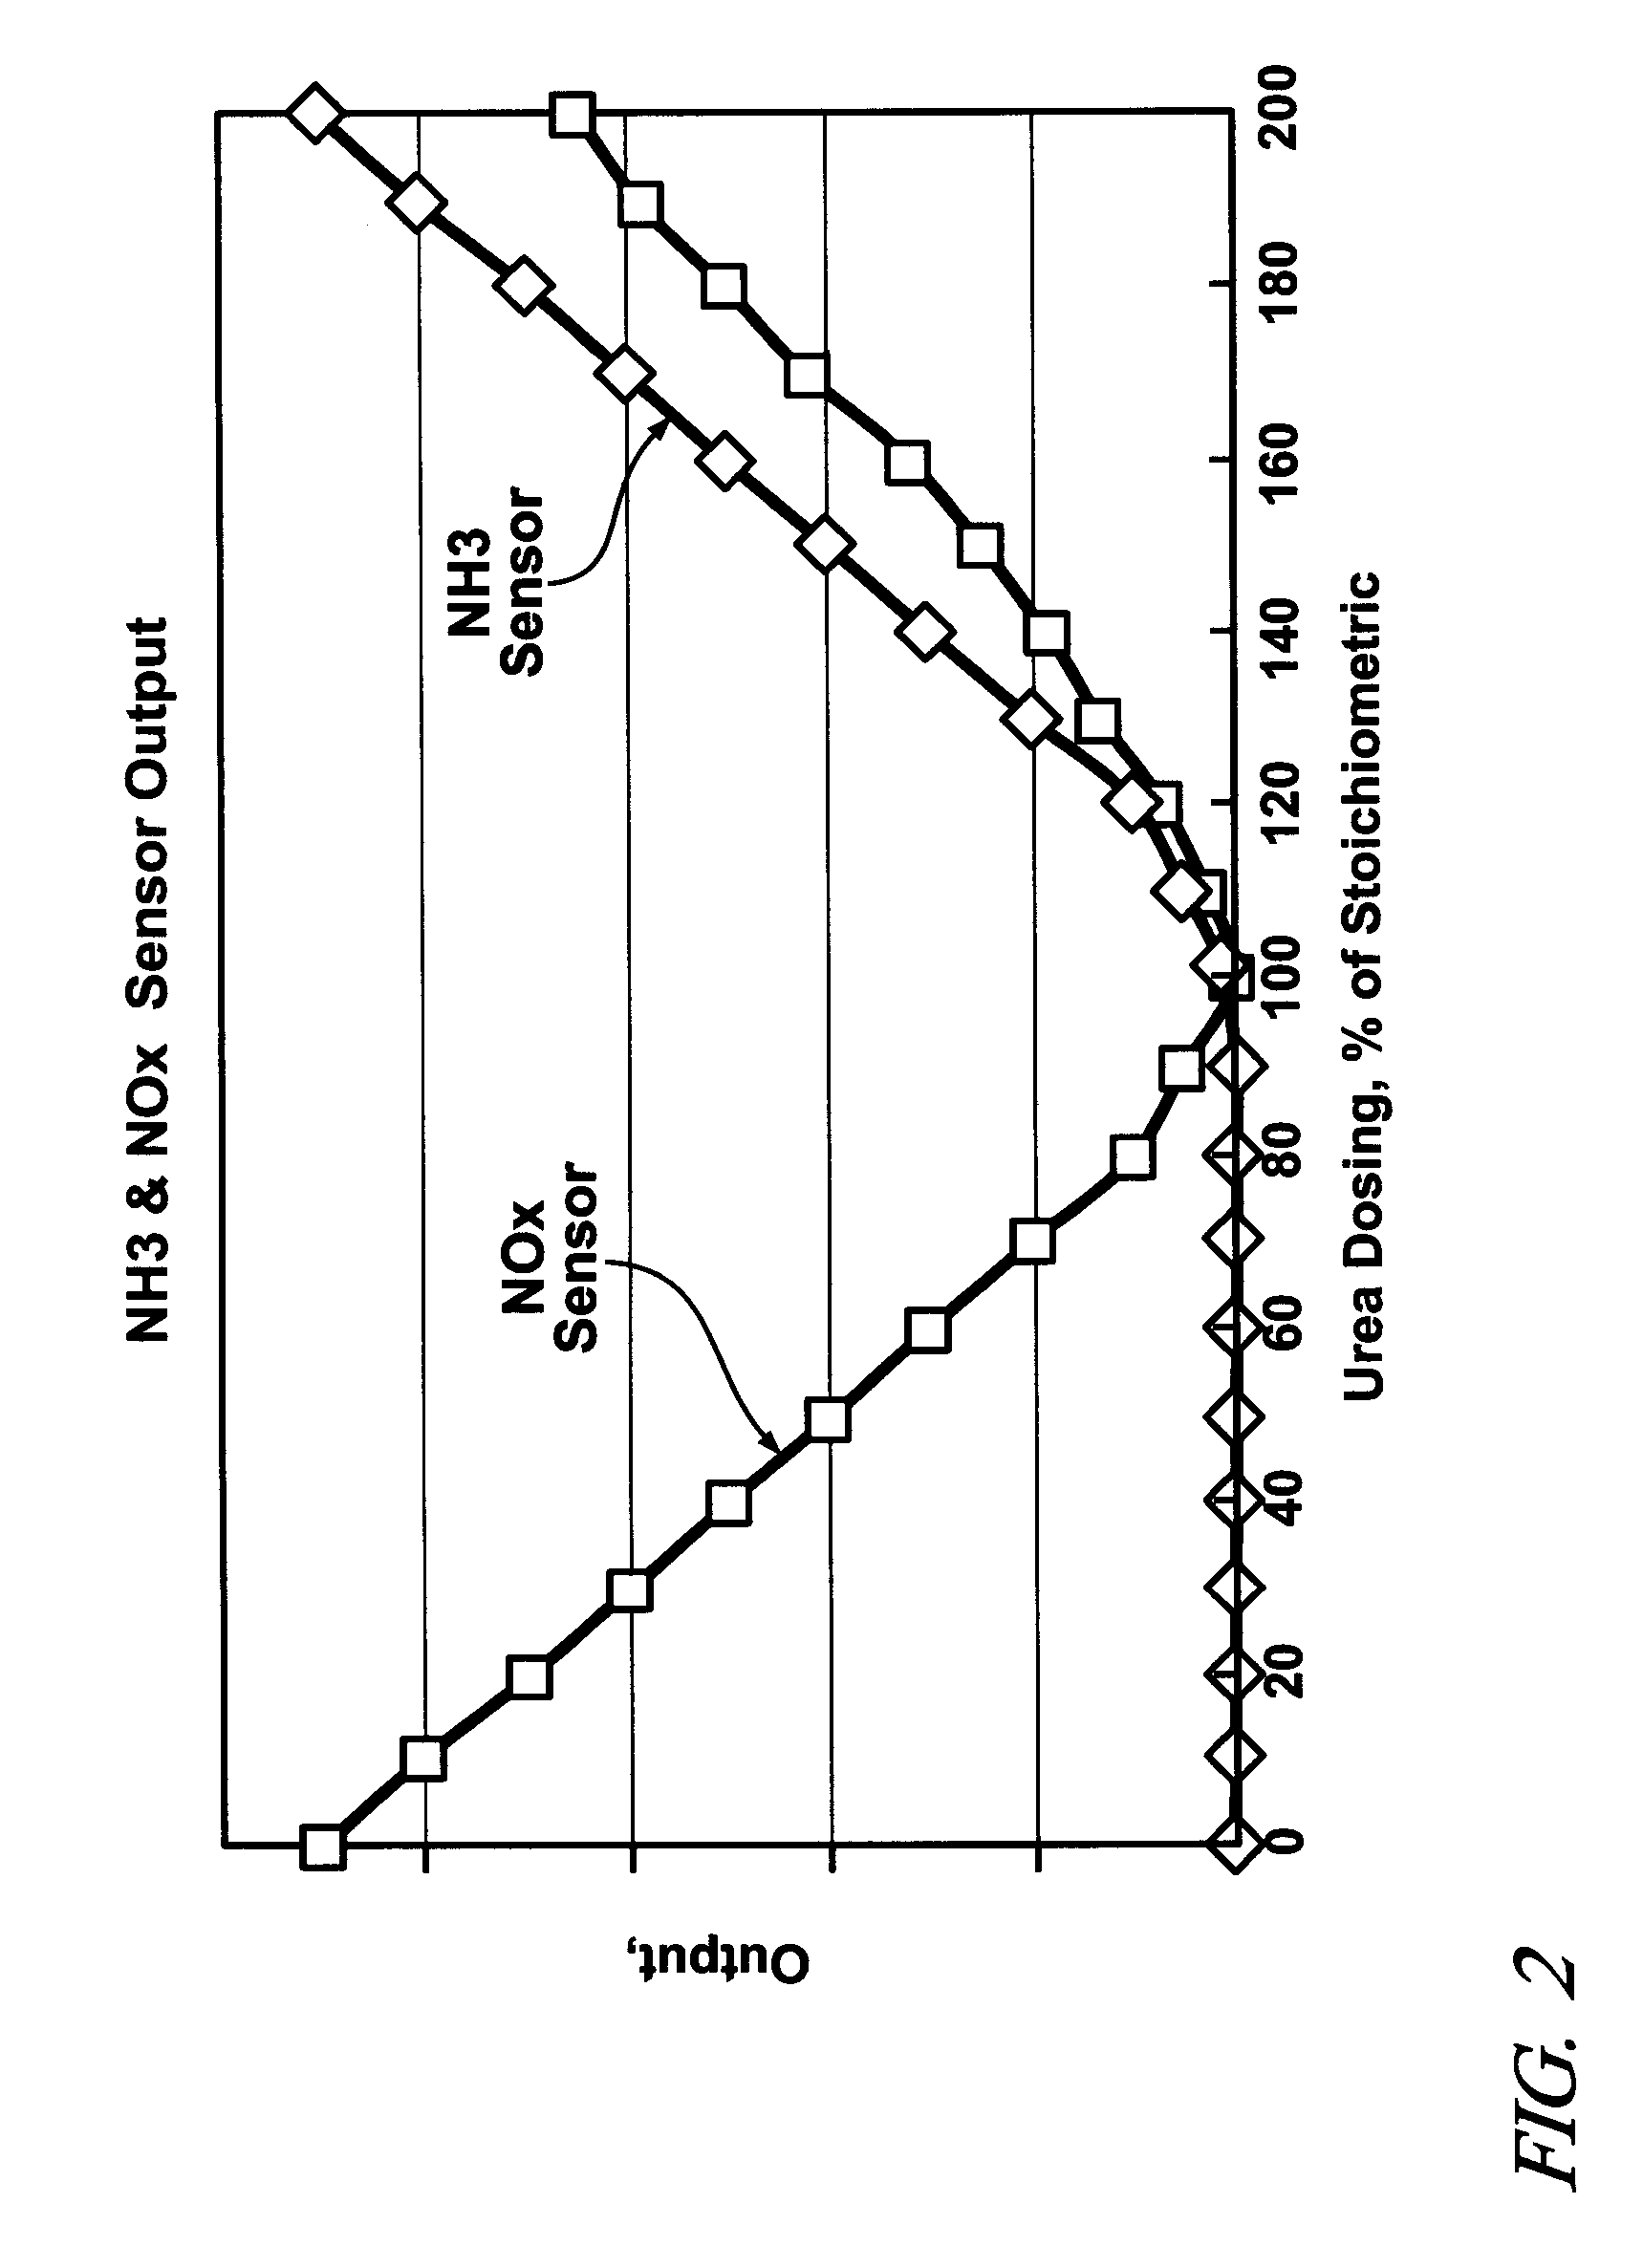 Method and Apparatus for Urea Injection in an Exhaust Aftertreatment System